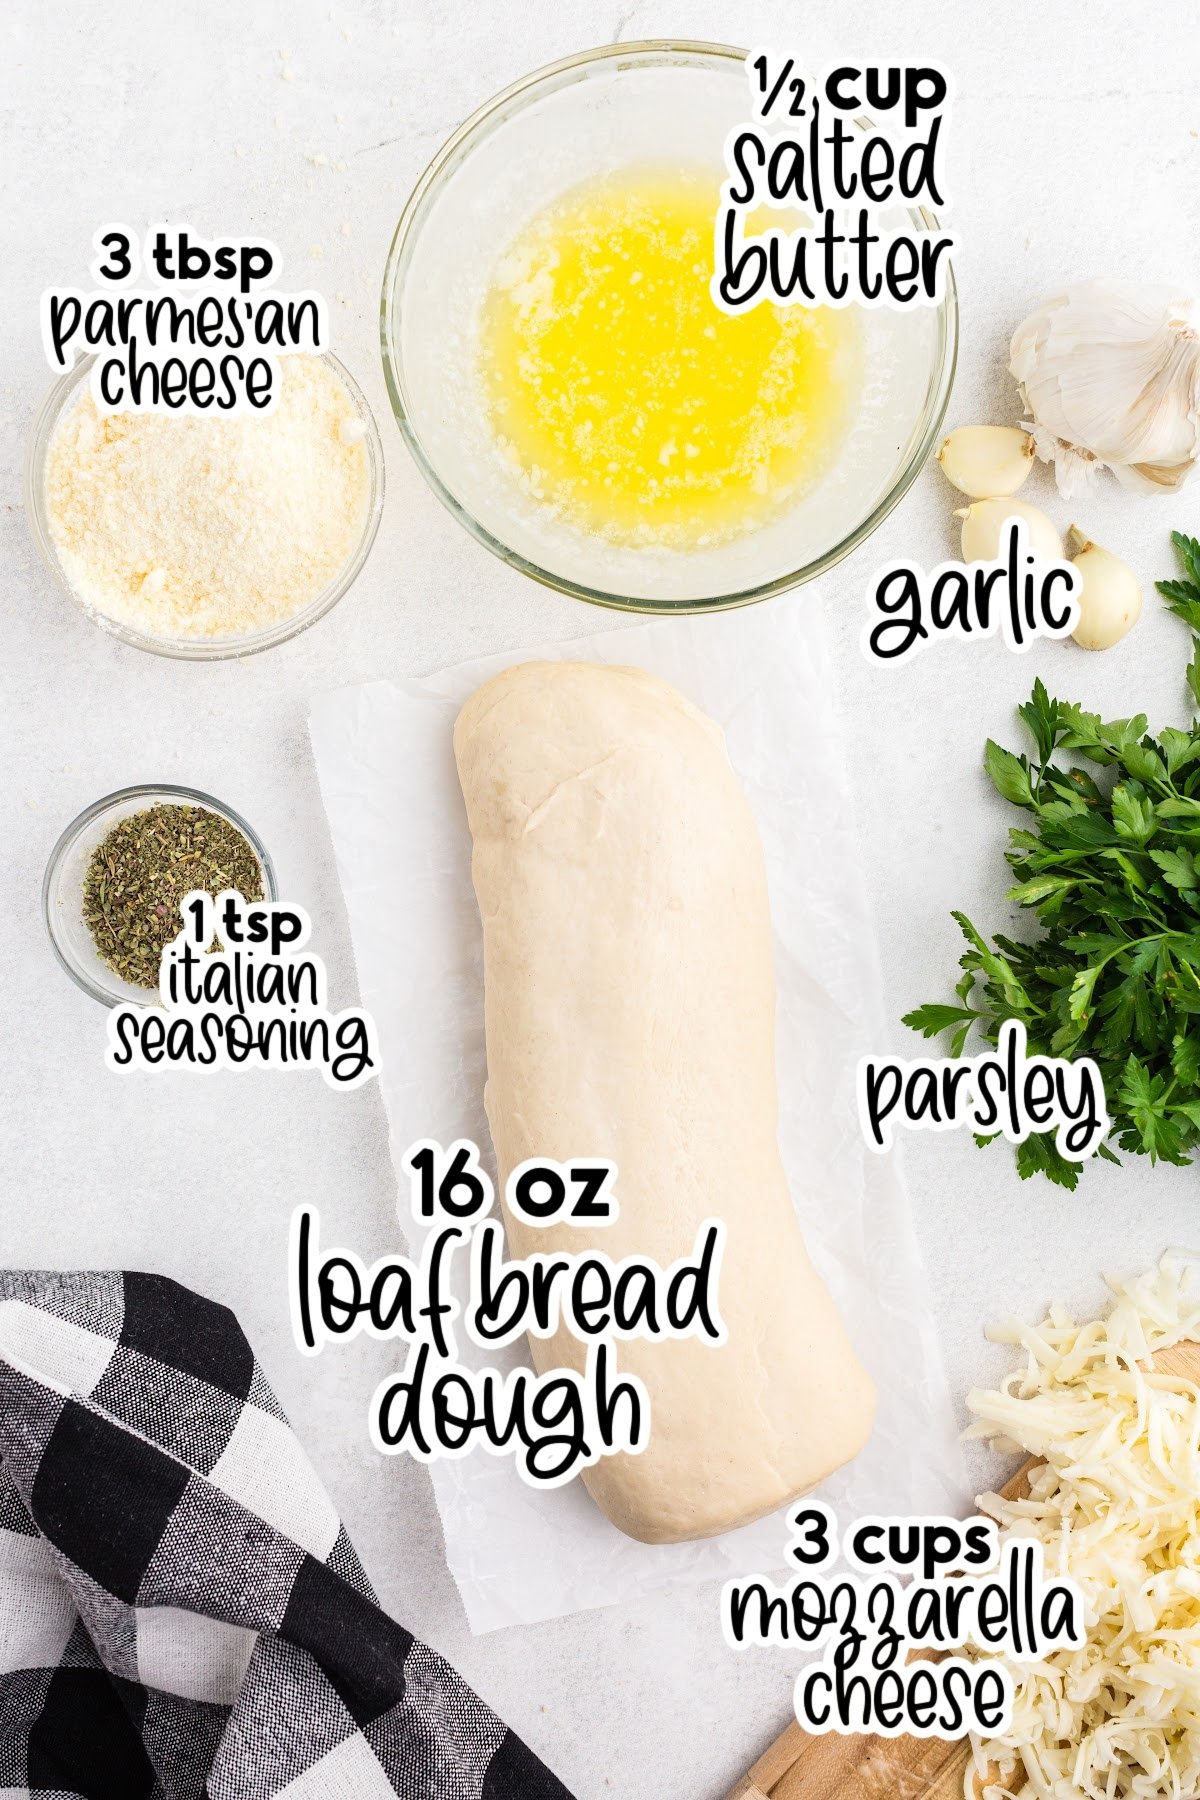 All ingredients layed out on the counter for ease in baking, with text overlay.